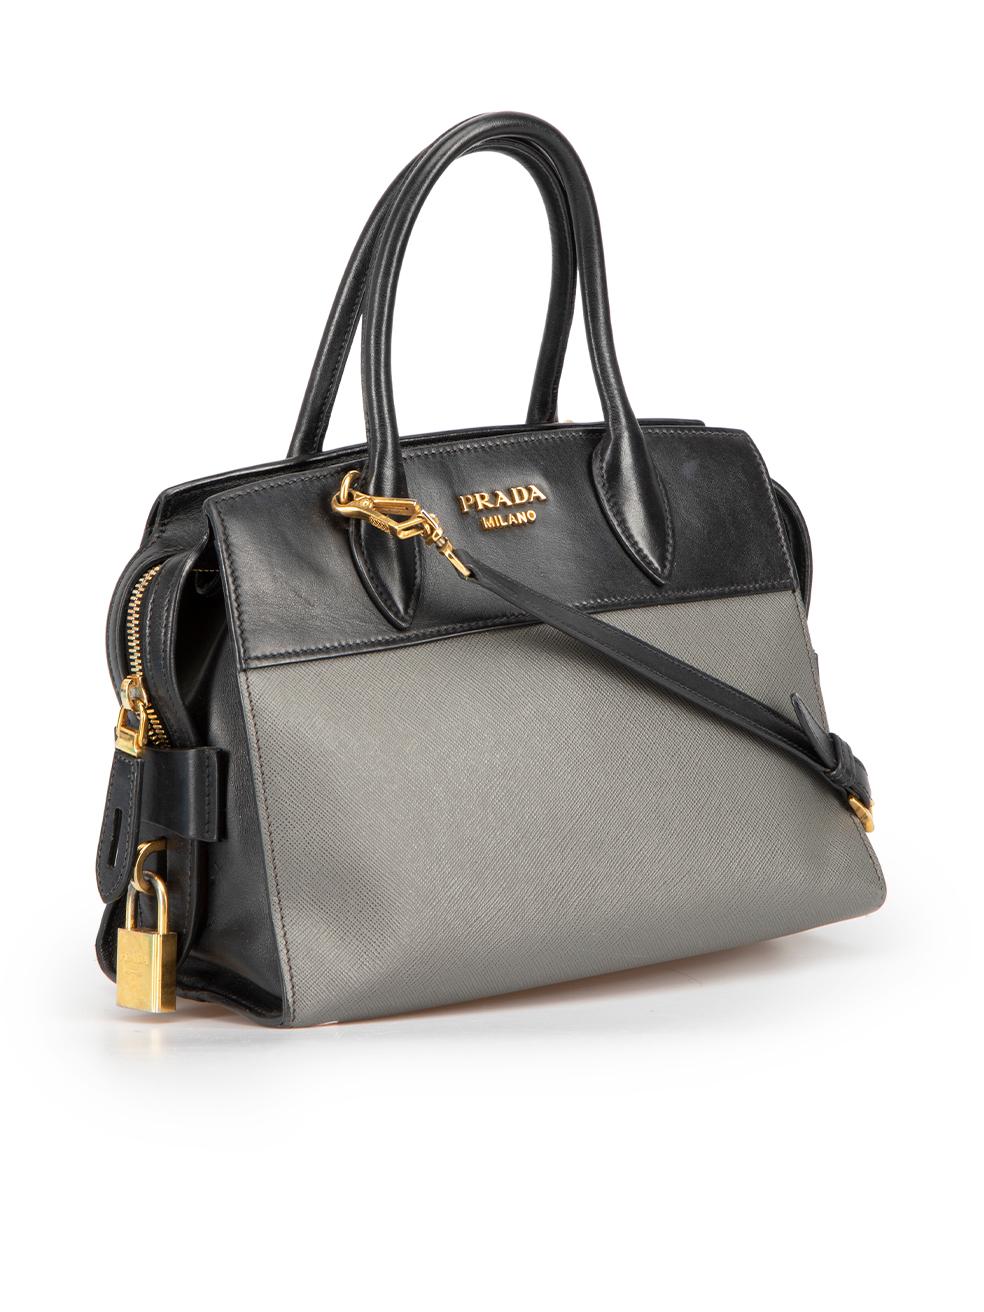 CONDITION is Good. Minor wear to handbag is evident. Light creasing leather and tarnishing to hardware with slight scuffing to outer corners on this used Prada designer resale item. Bag strap included.
  
  Details
  Esplanade
  Grey
  Leather
 